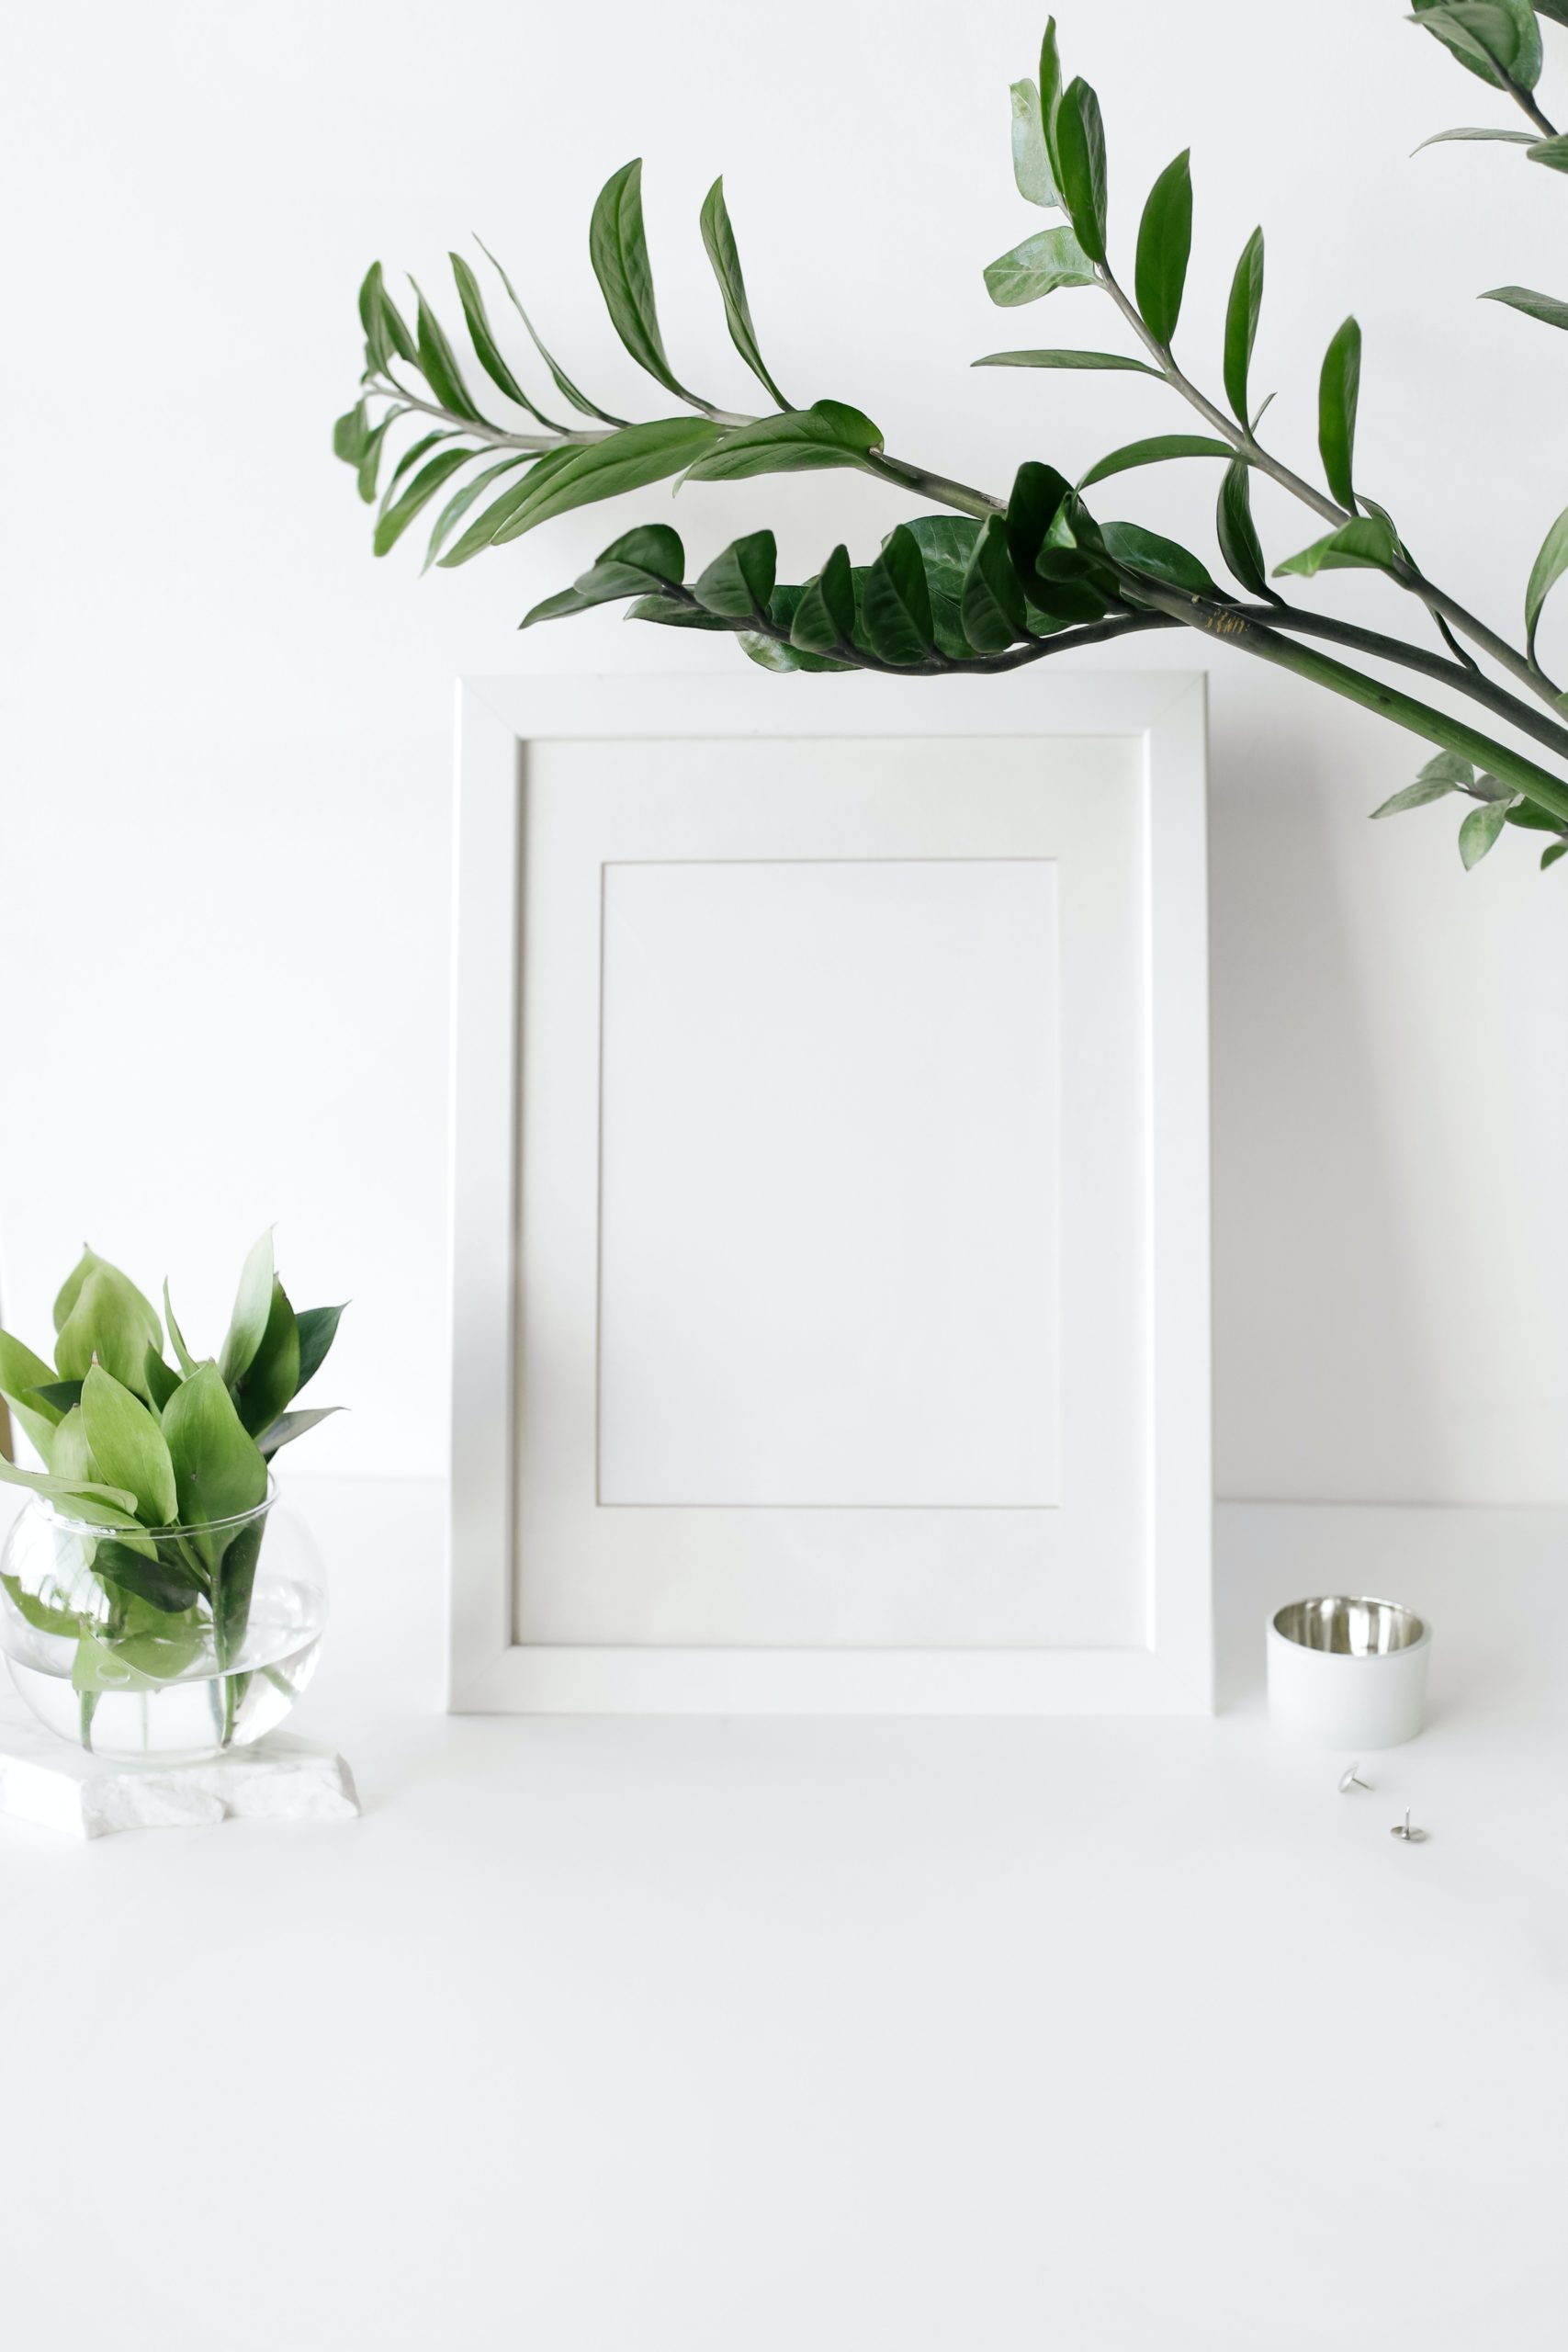 Empty photo frame on desk decorated with green plants